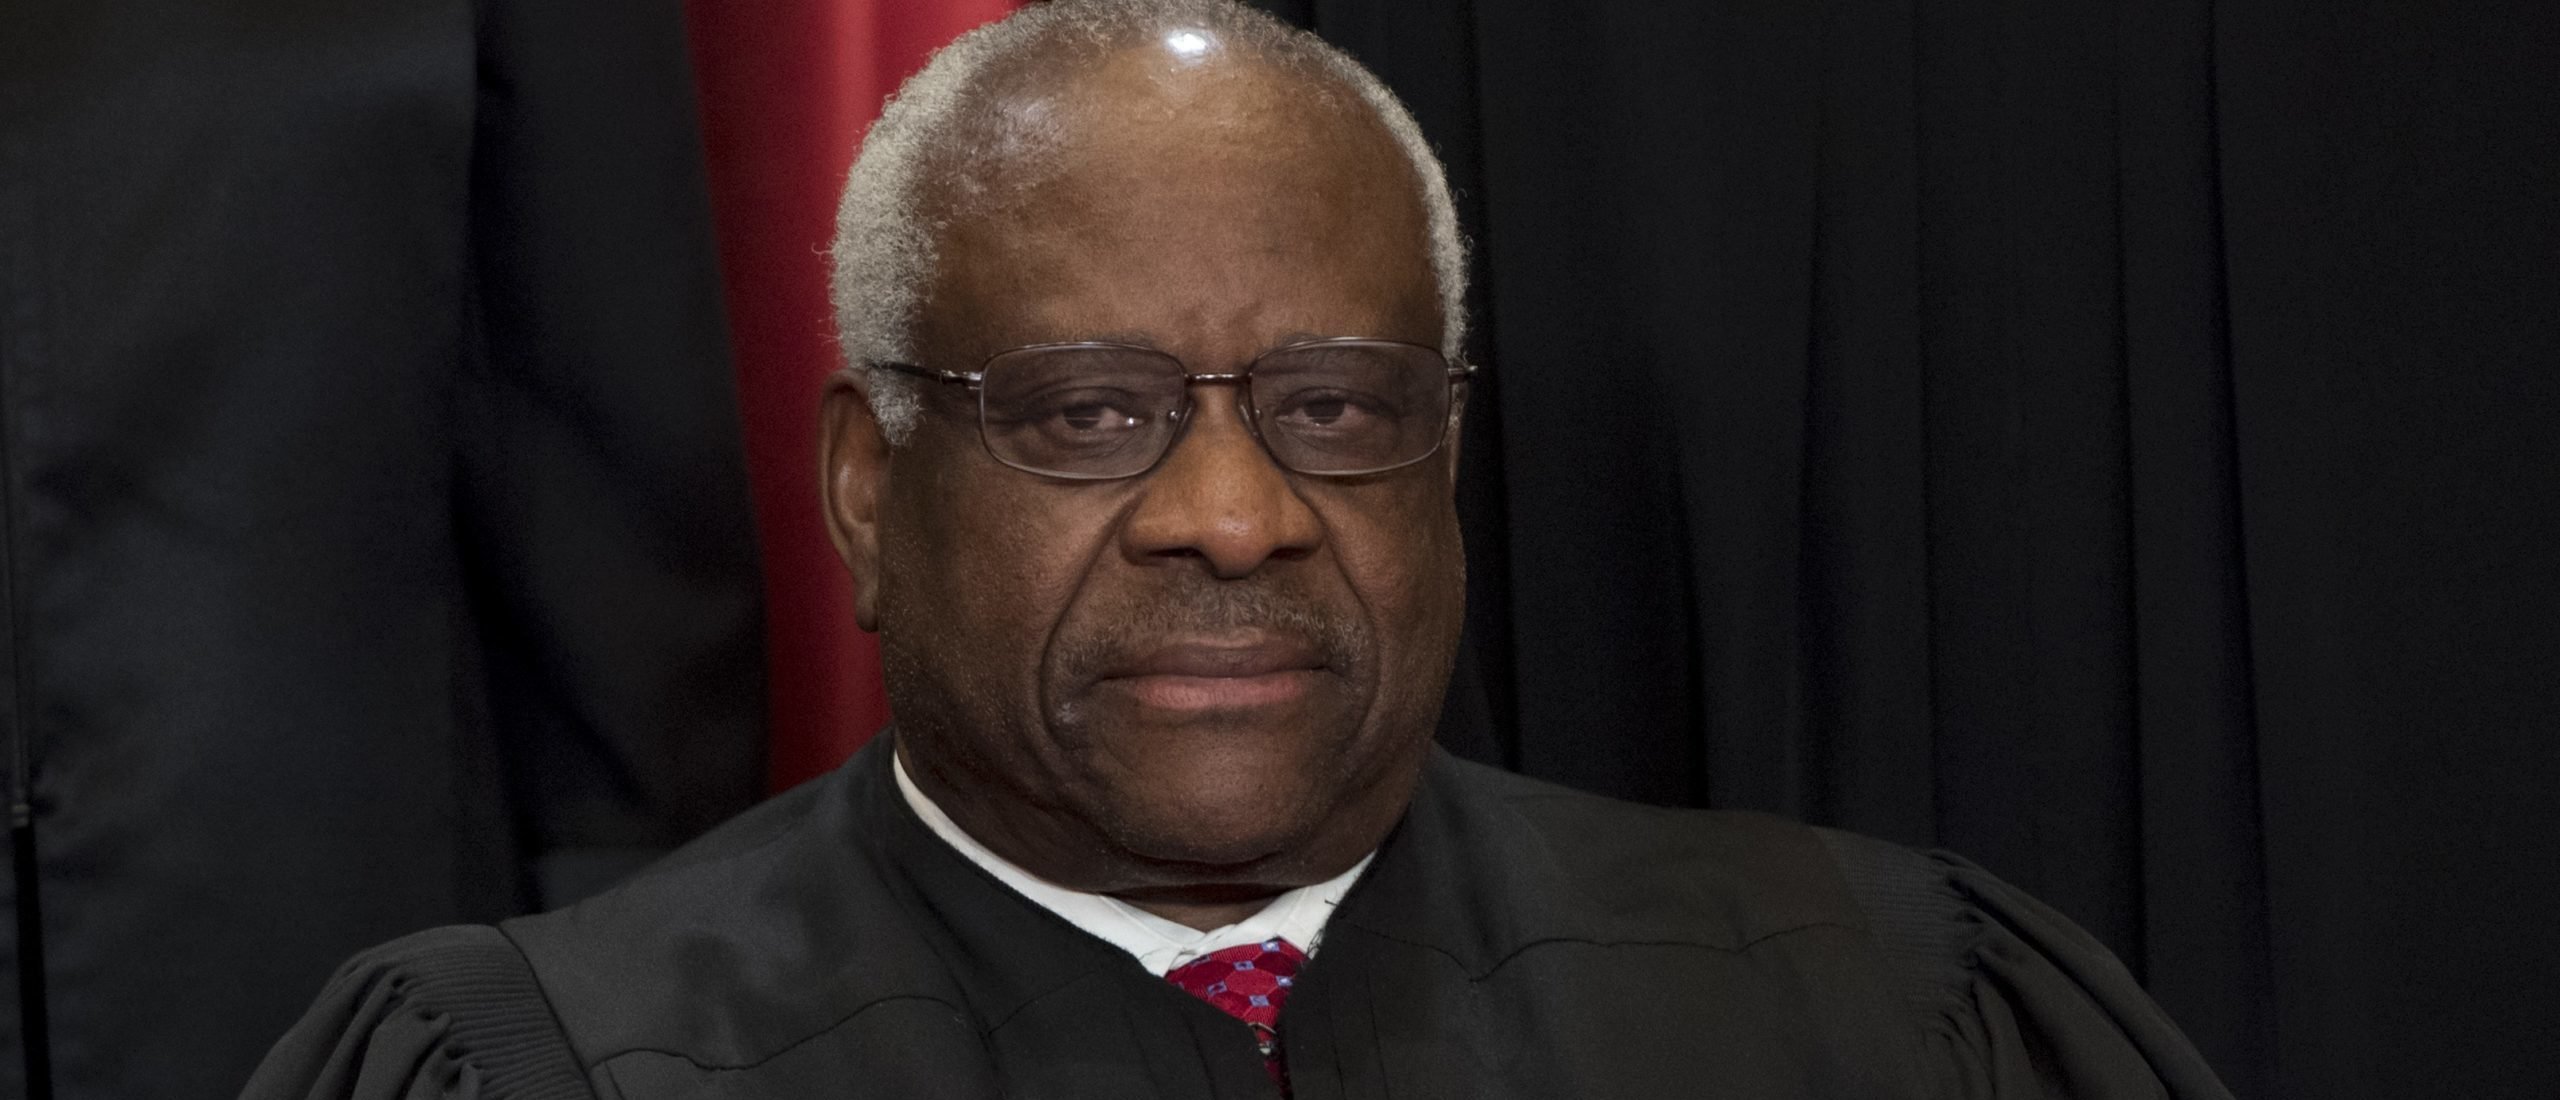 US Supreme Court Associate Justice Clarence Thomas sits for an official photo with other members of the US Supreme Court in the Supreme Court in Washington, DC, June 1, 2017. (Photo by SAUL LOEB/AFP via Getty Images)